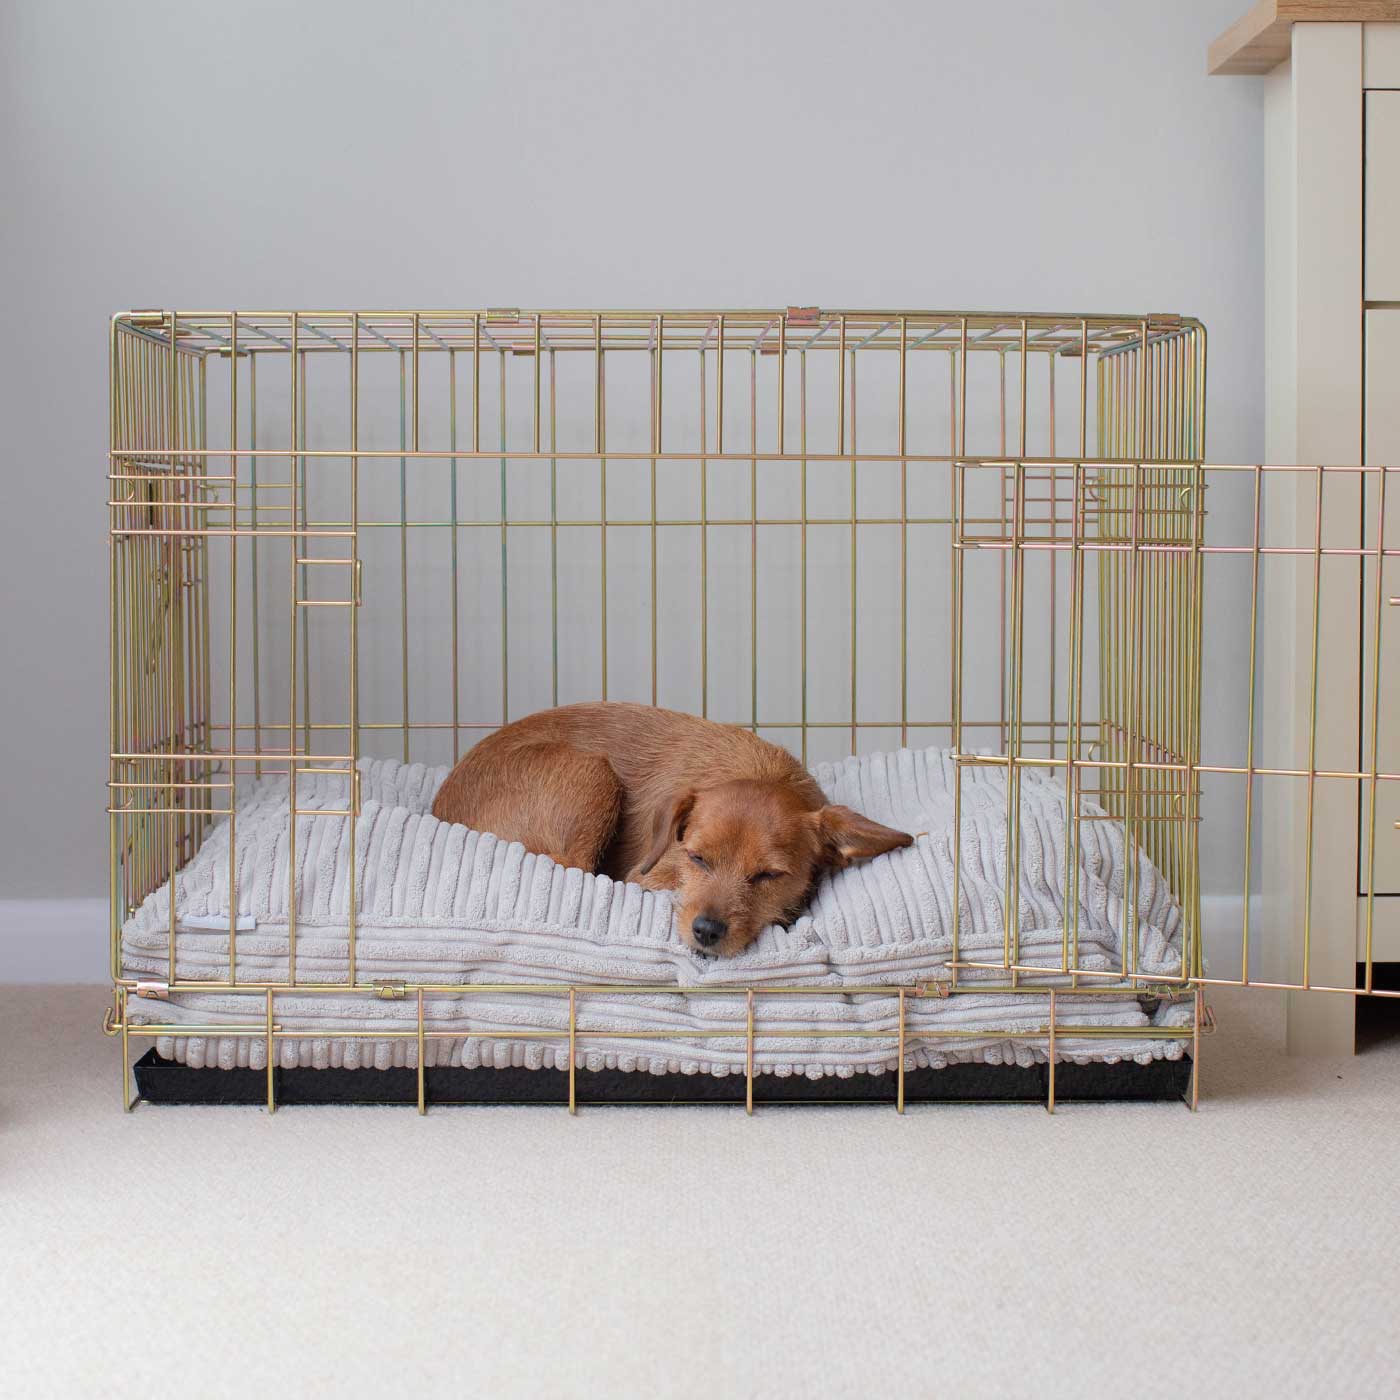 Luxury Dog Cage Cushion, Essentials Plush Cushion in Light Grey! The Perfect Dog Cage Accessory, Available To Personalize Now at Lords & Labradors US